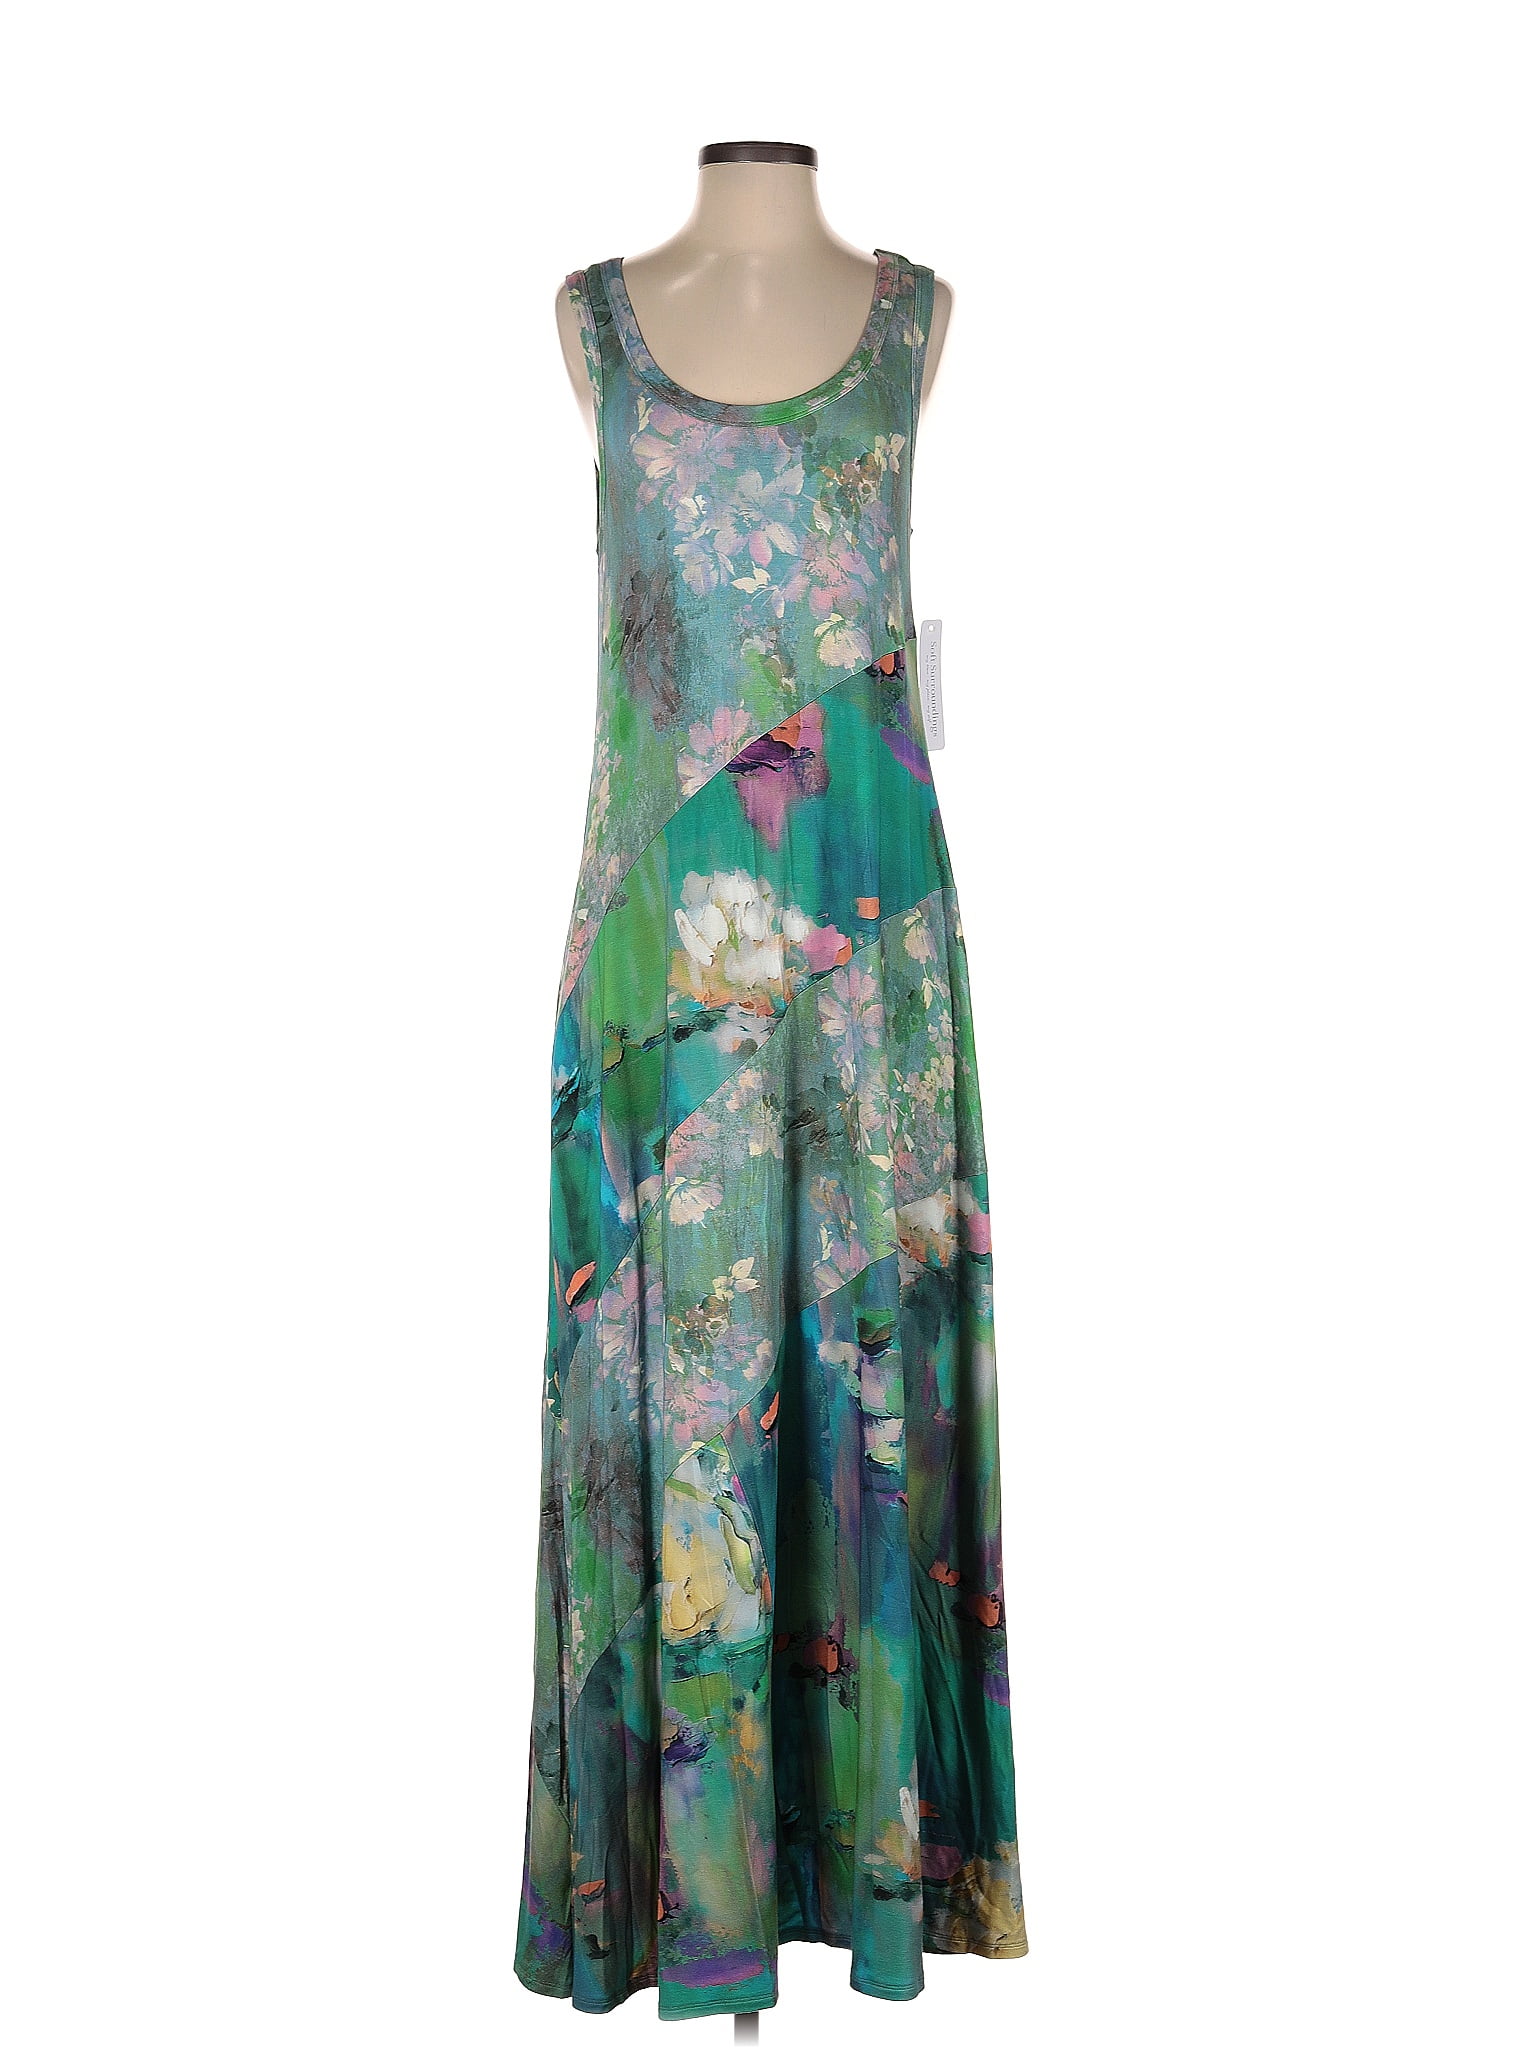 Soft Surroundings Floral Multi Color Green Casual Dress Size S - 67% ...